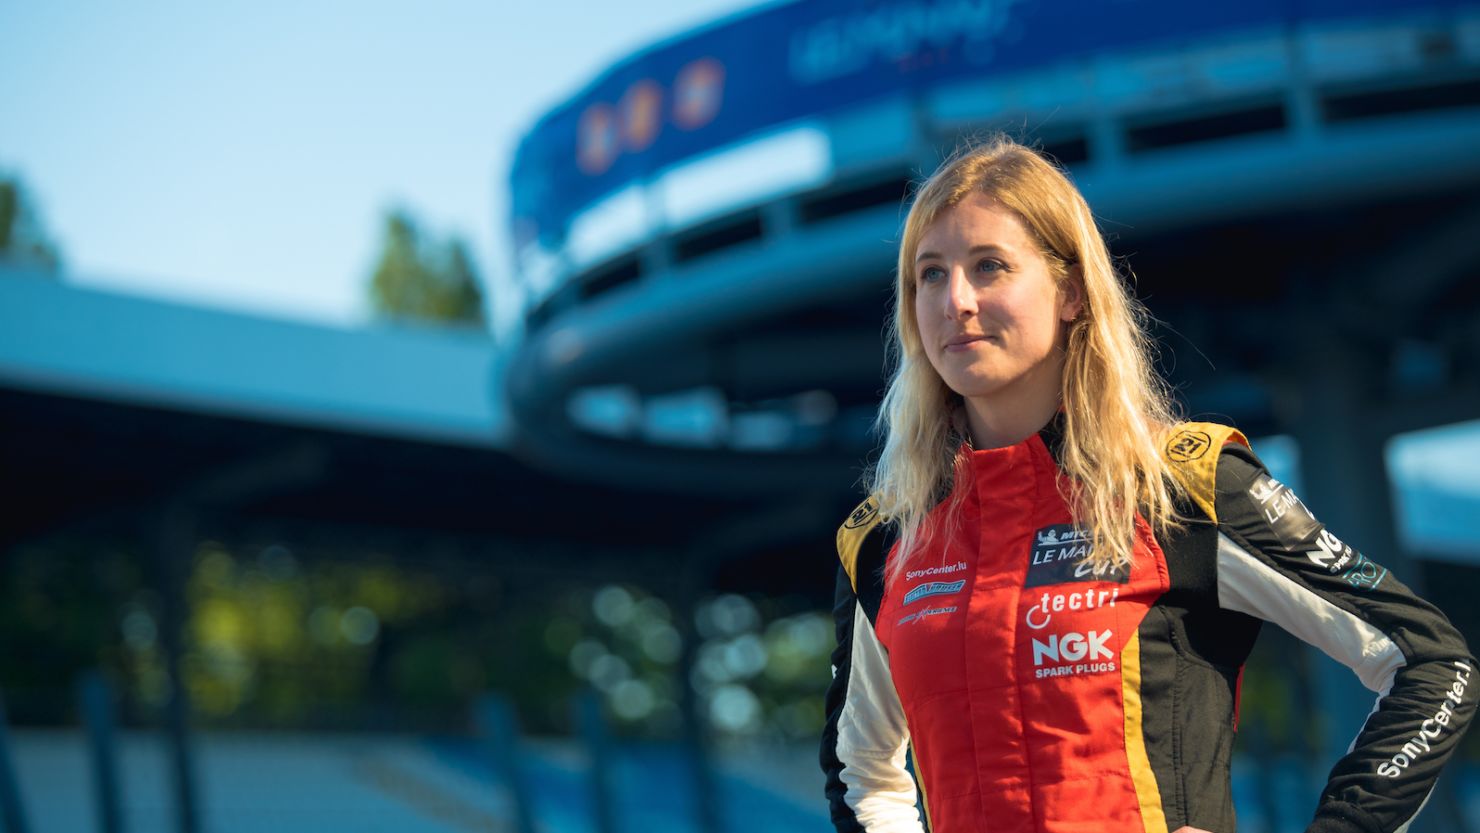 Charlie Martin is aiming to become the first transgender driver to race at Le Mans.